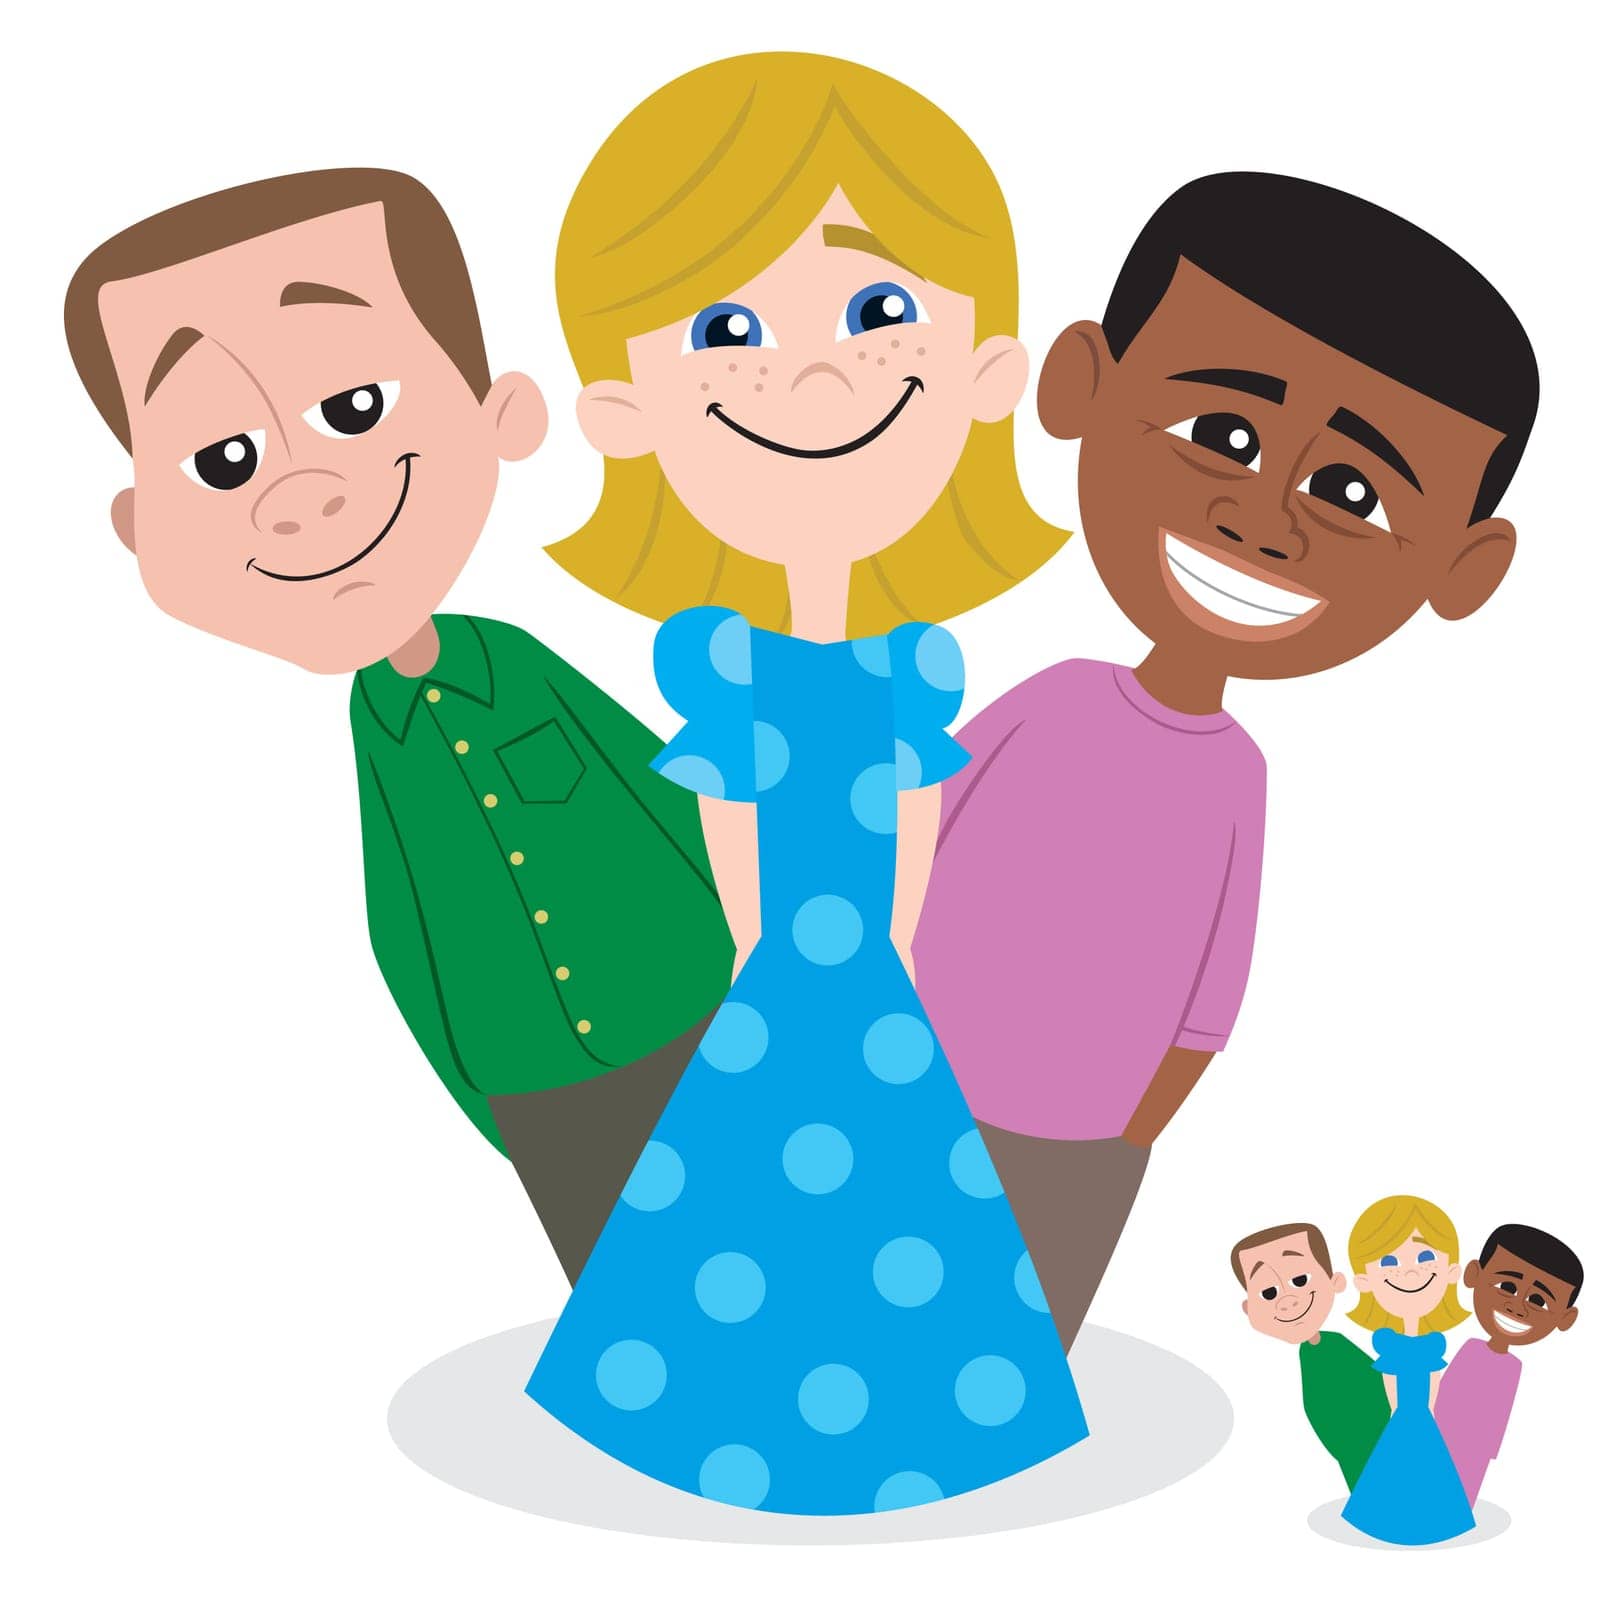 Three kids. In the lower right corner is a simplified version of the image, which can be used as an icon. 